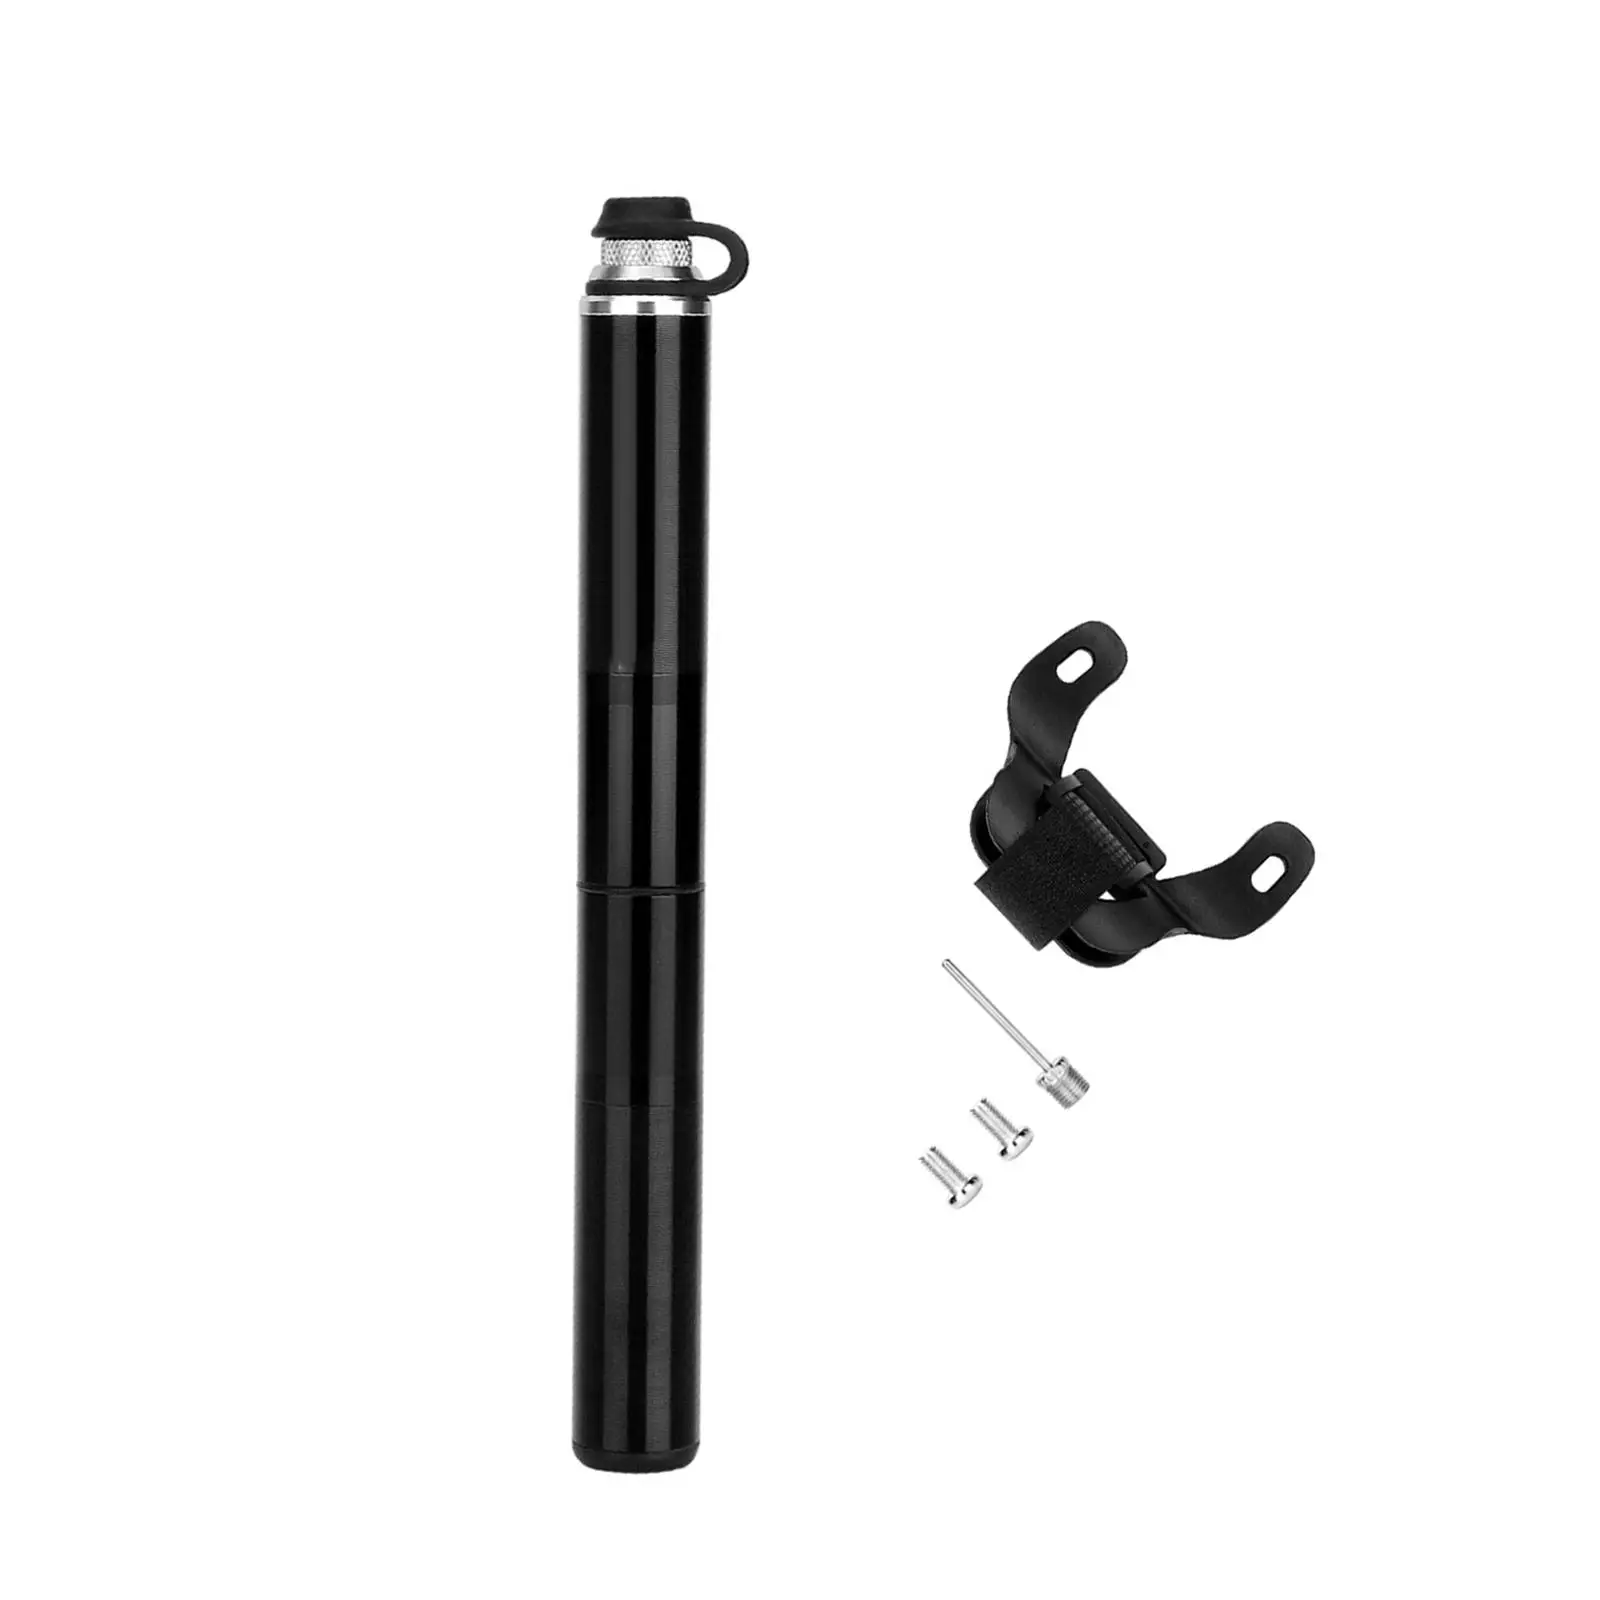 Portable Bike Pumps Accessories Easy Carry Include Mount set Handheld Tire Inflator for Cycling Mountain Bike Basketball Balloon